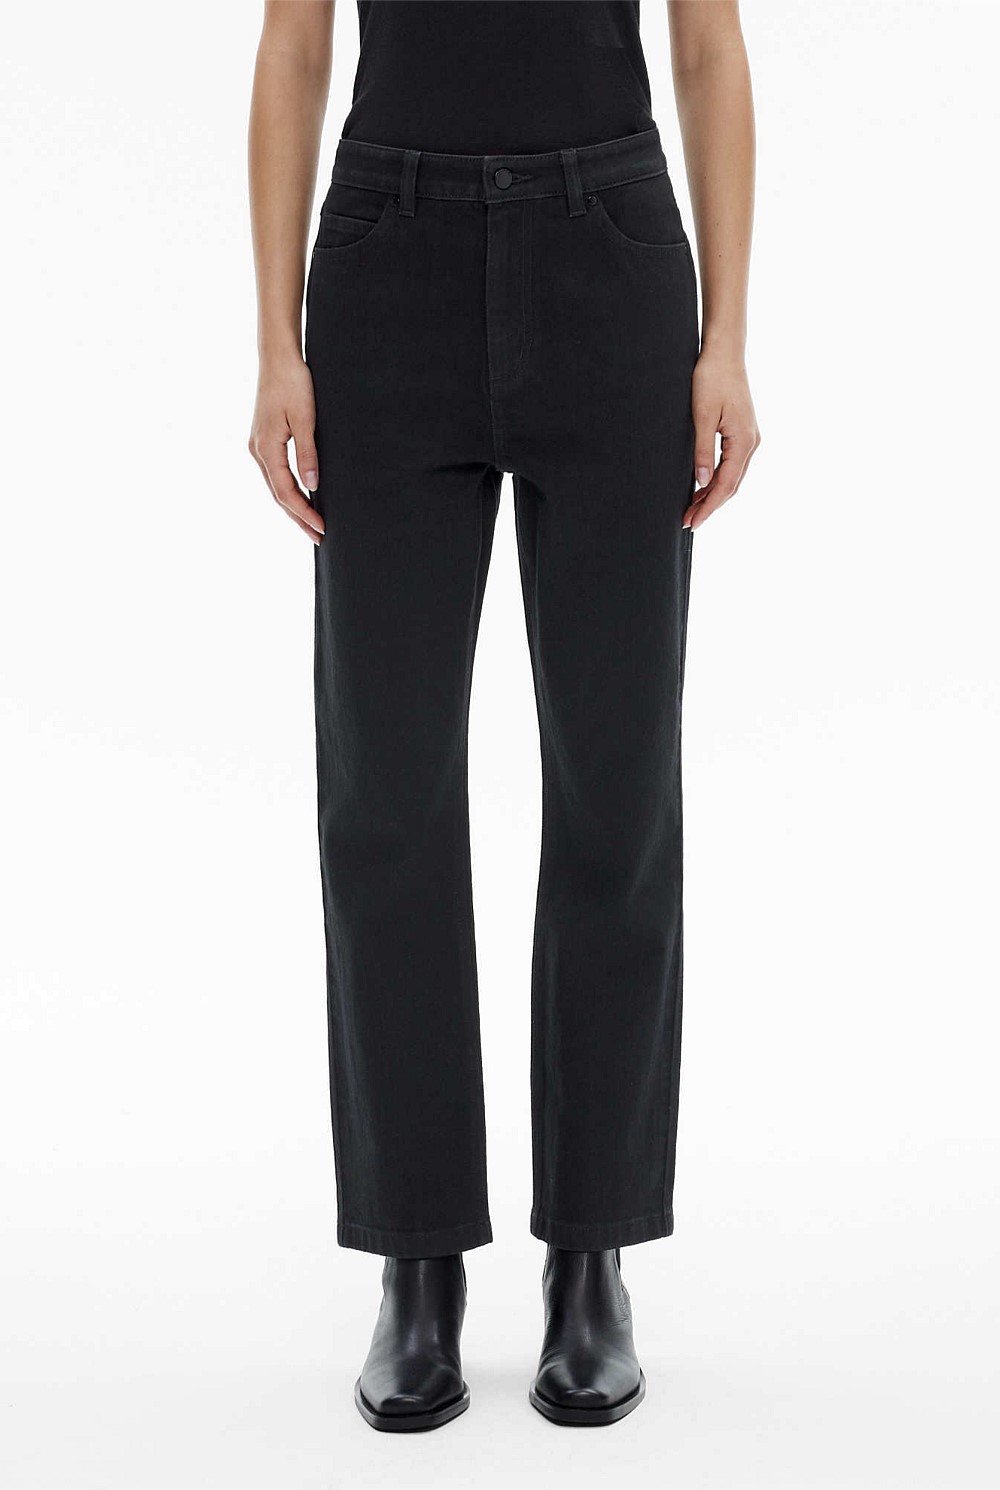 Relaxed Jeans - Women's Relaxed Fit Jeans Online - Witchery